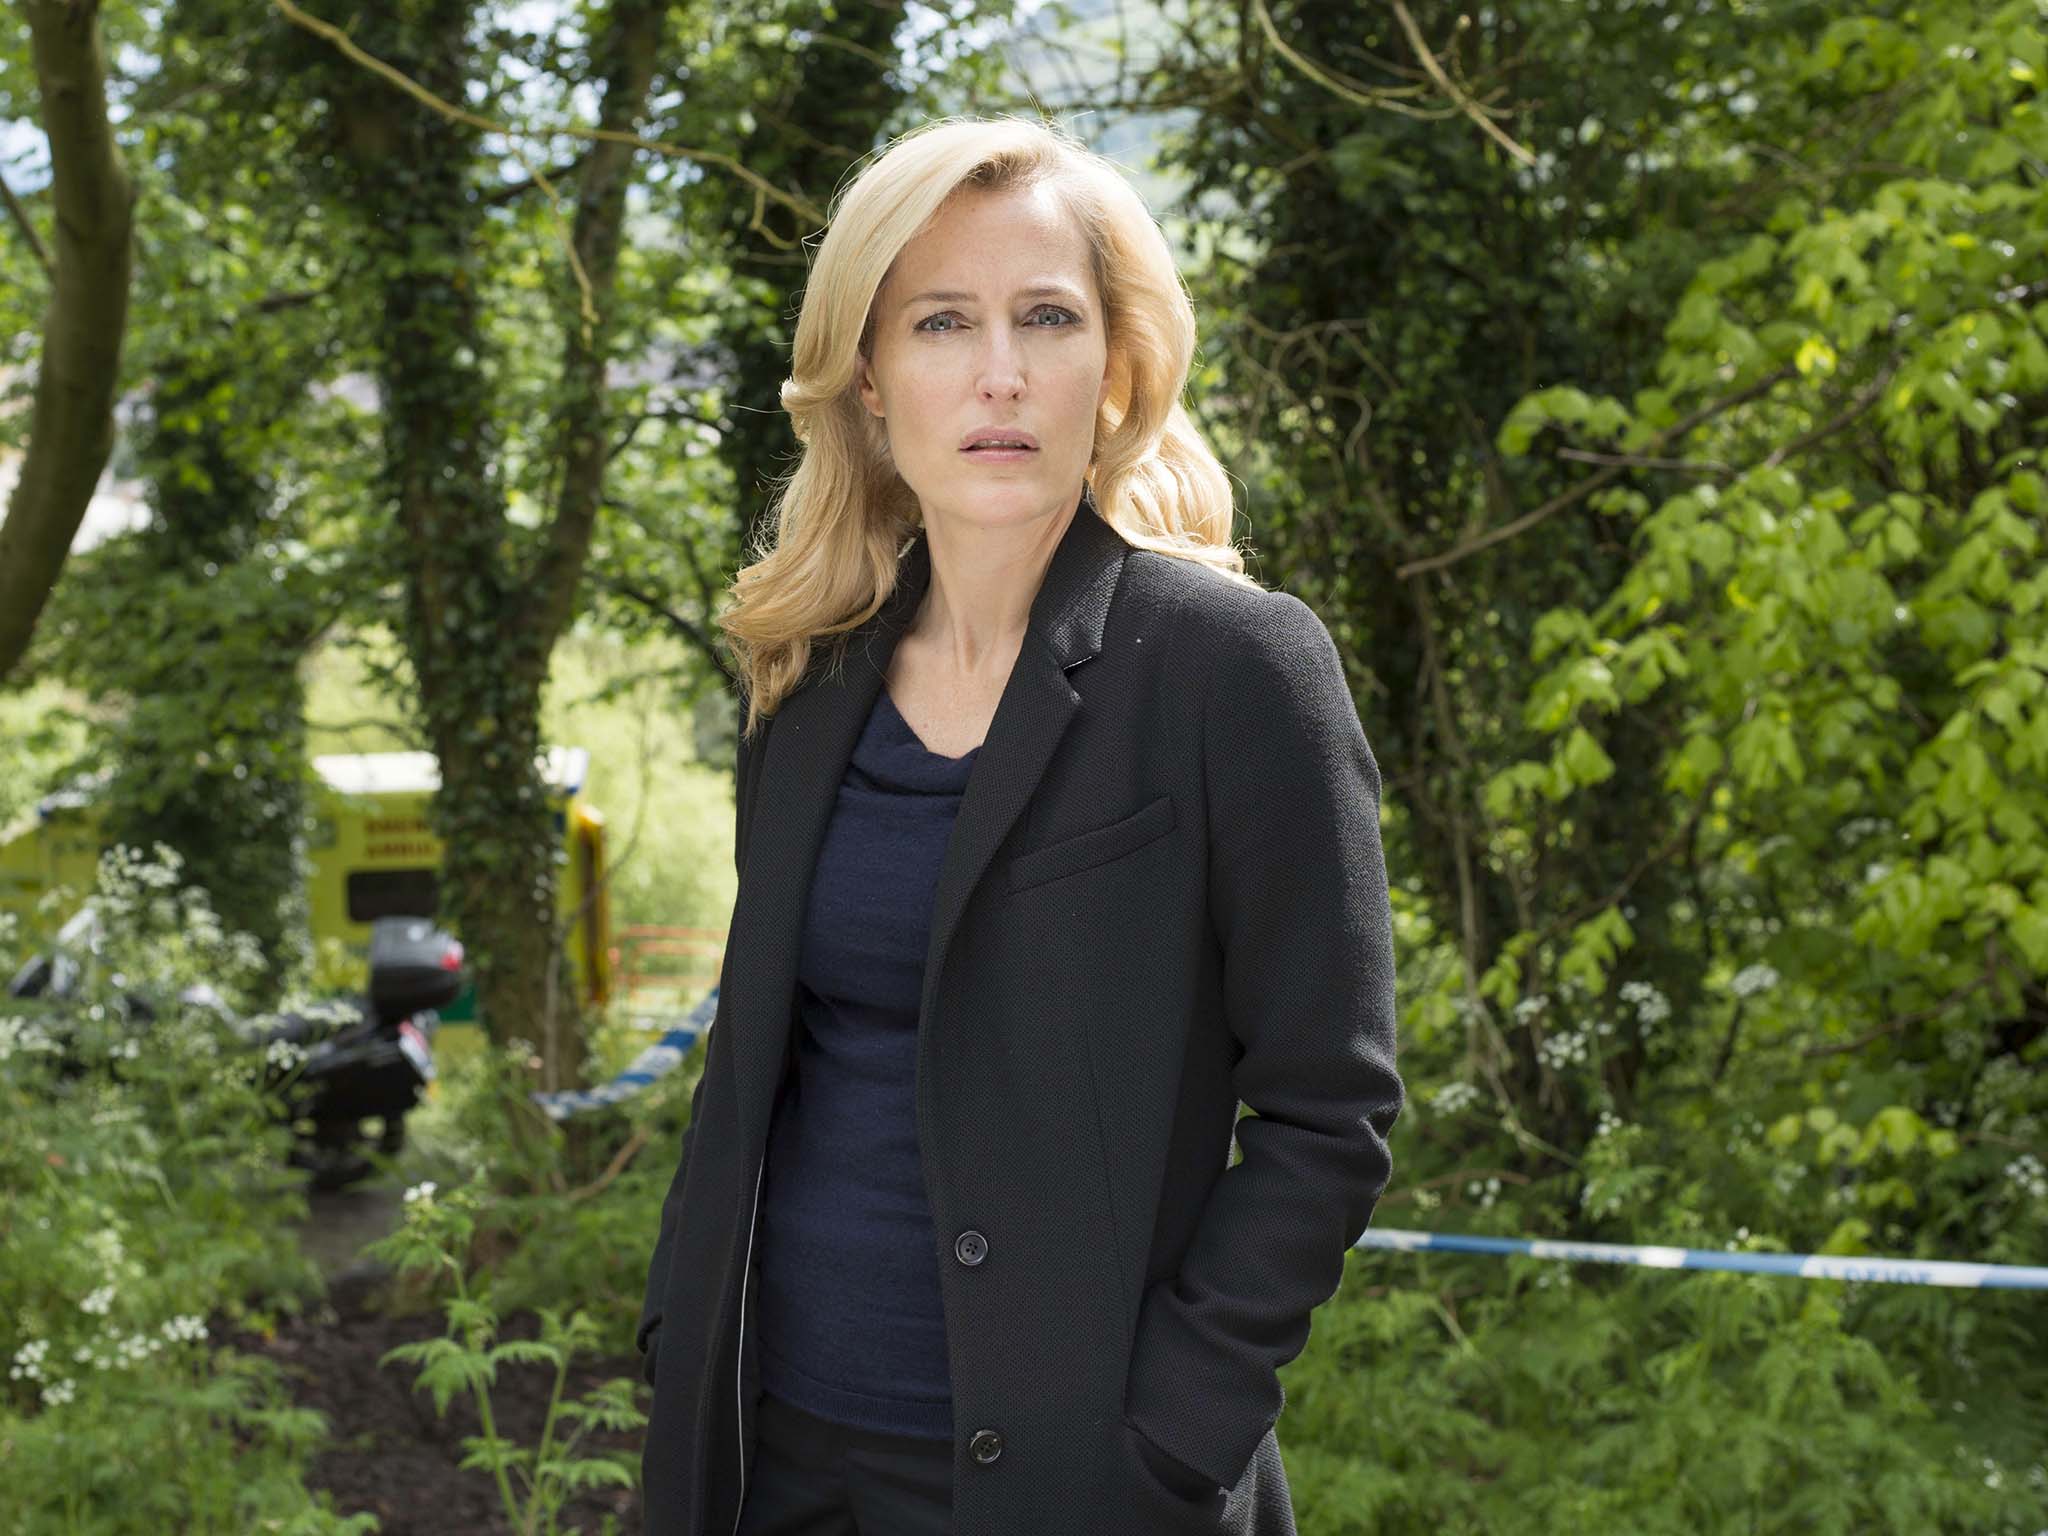 Gillian Anderson as DSI Stella Gibson in The Fall